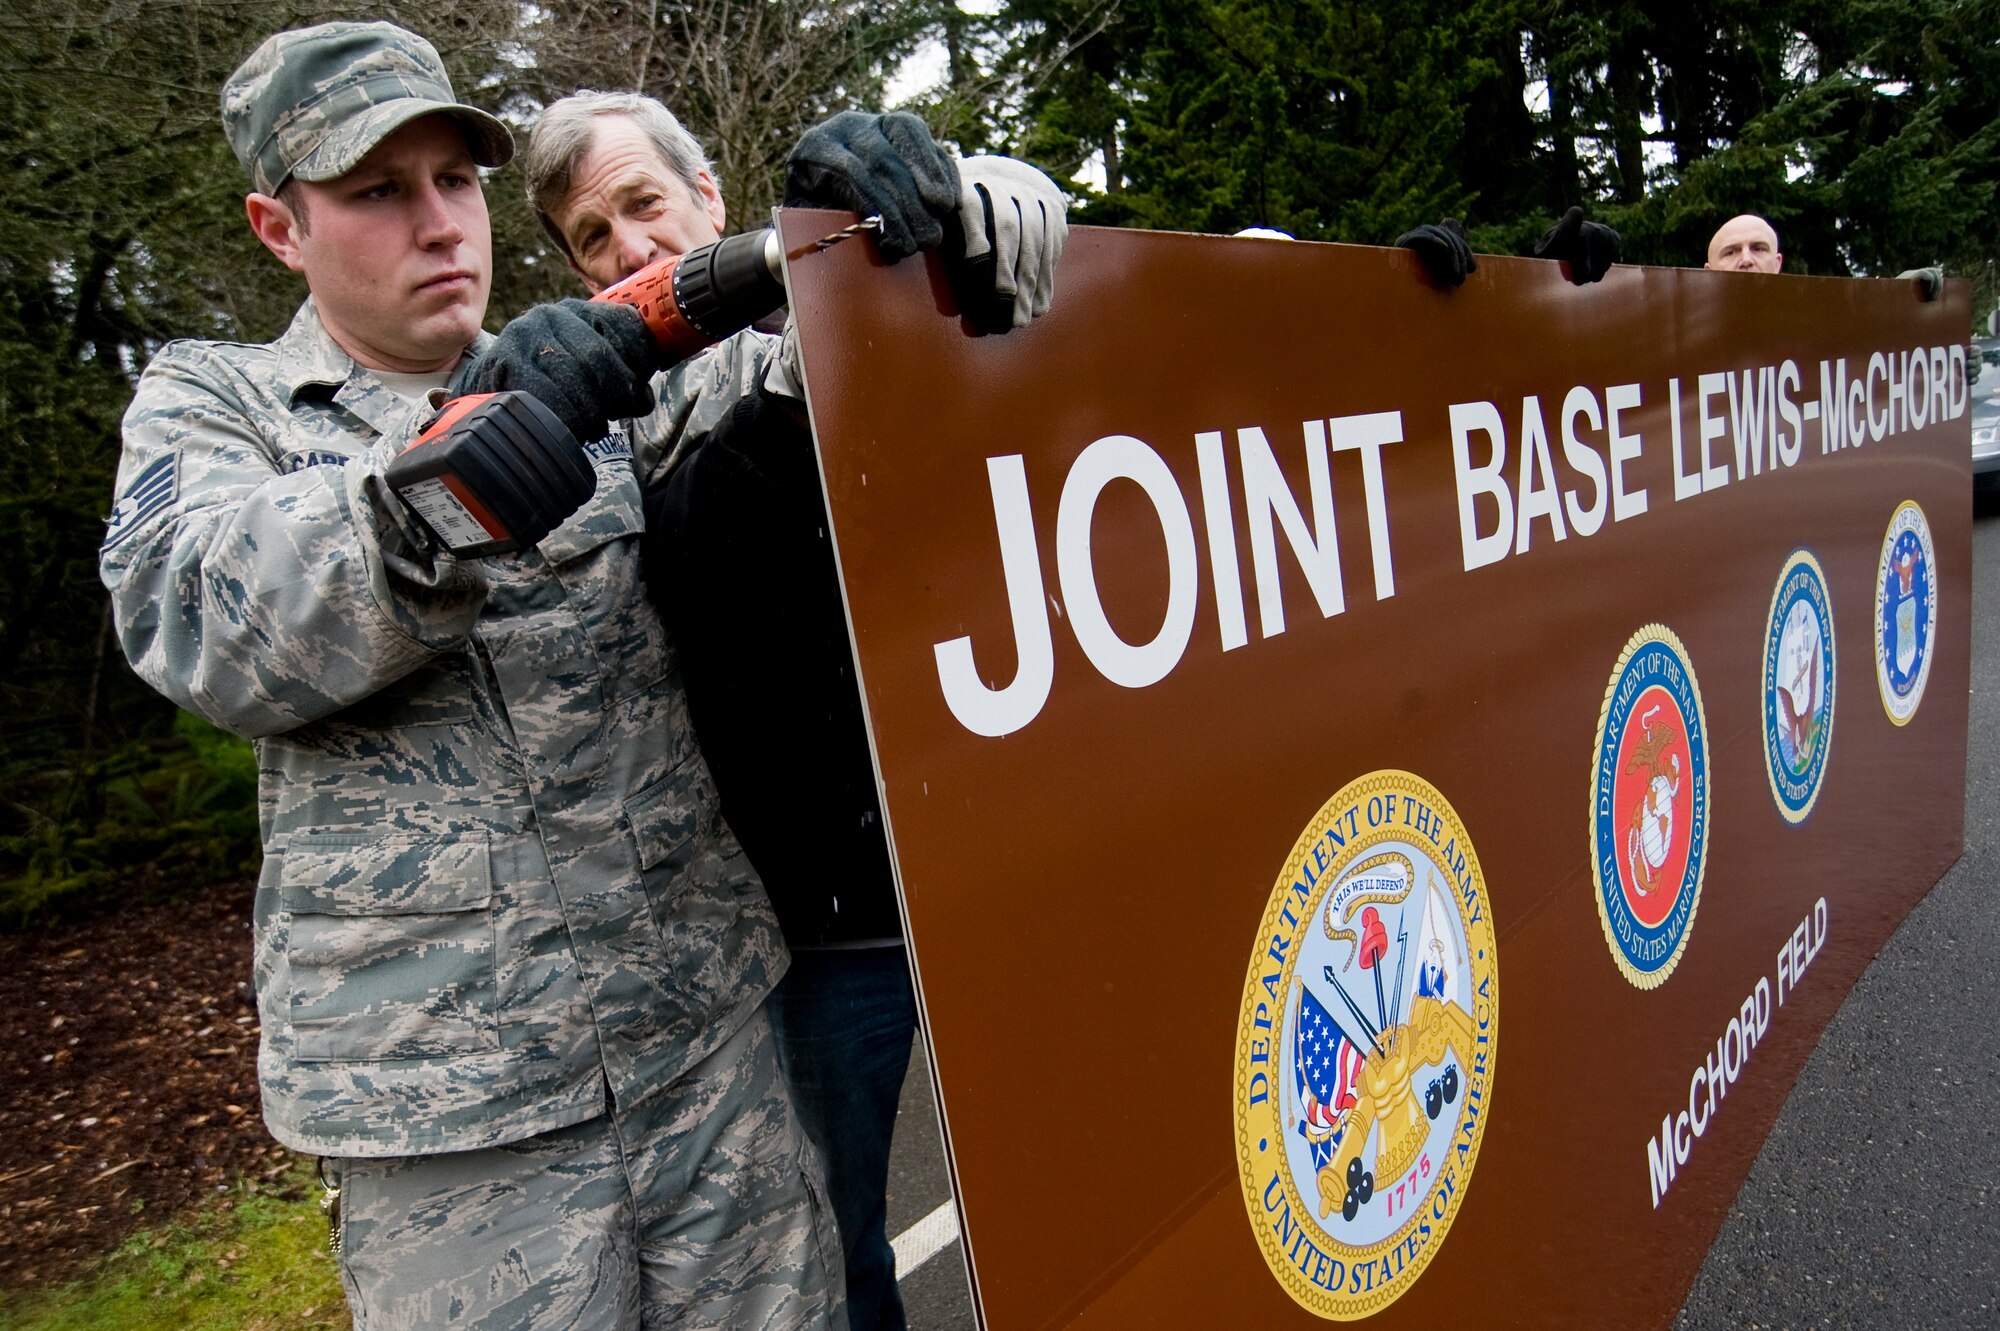 Staff Sgt. Jeffery Cardinal, left, and Craig Hayes, 62nd Civil Engineer Squadron, drill holes in the new Joint Base Lewis-McChord sign at the main gate Sunday in preparation of Initial Operational Capability of Joint Base Lewis-McChord. (U.S. Air Force Photo/Abner Guzman)